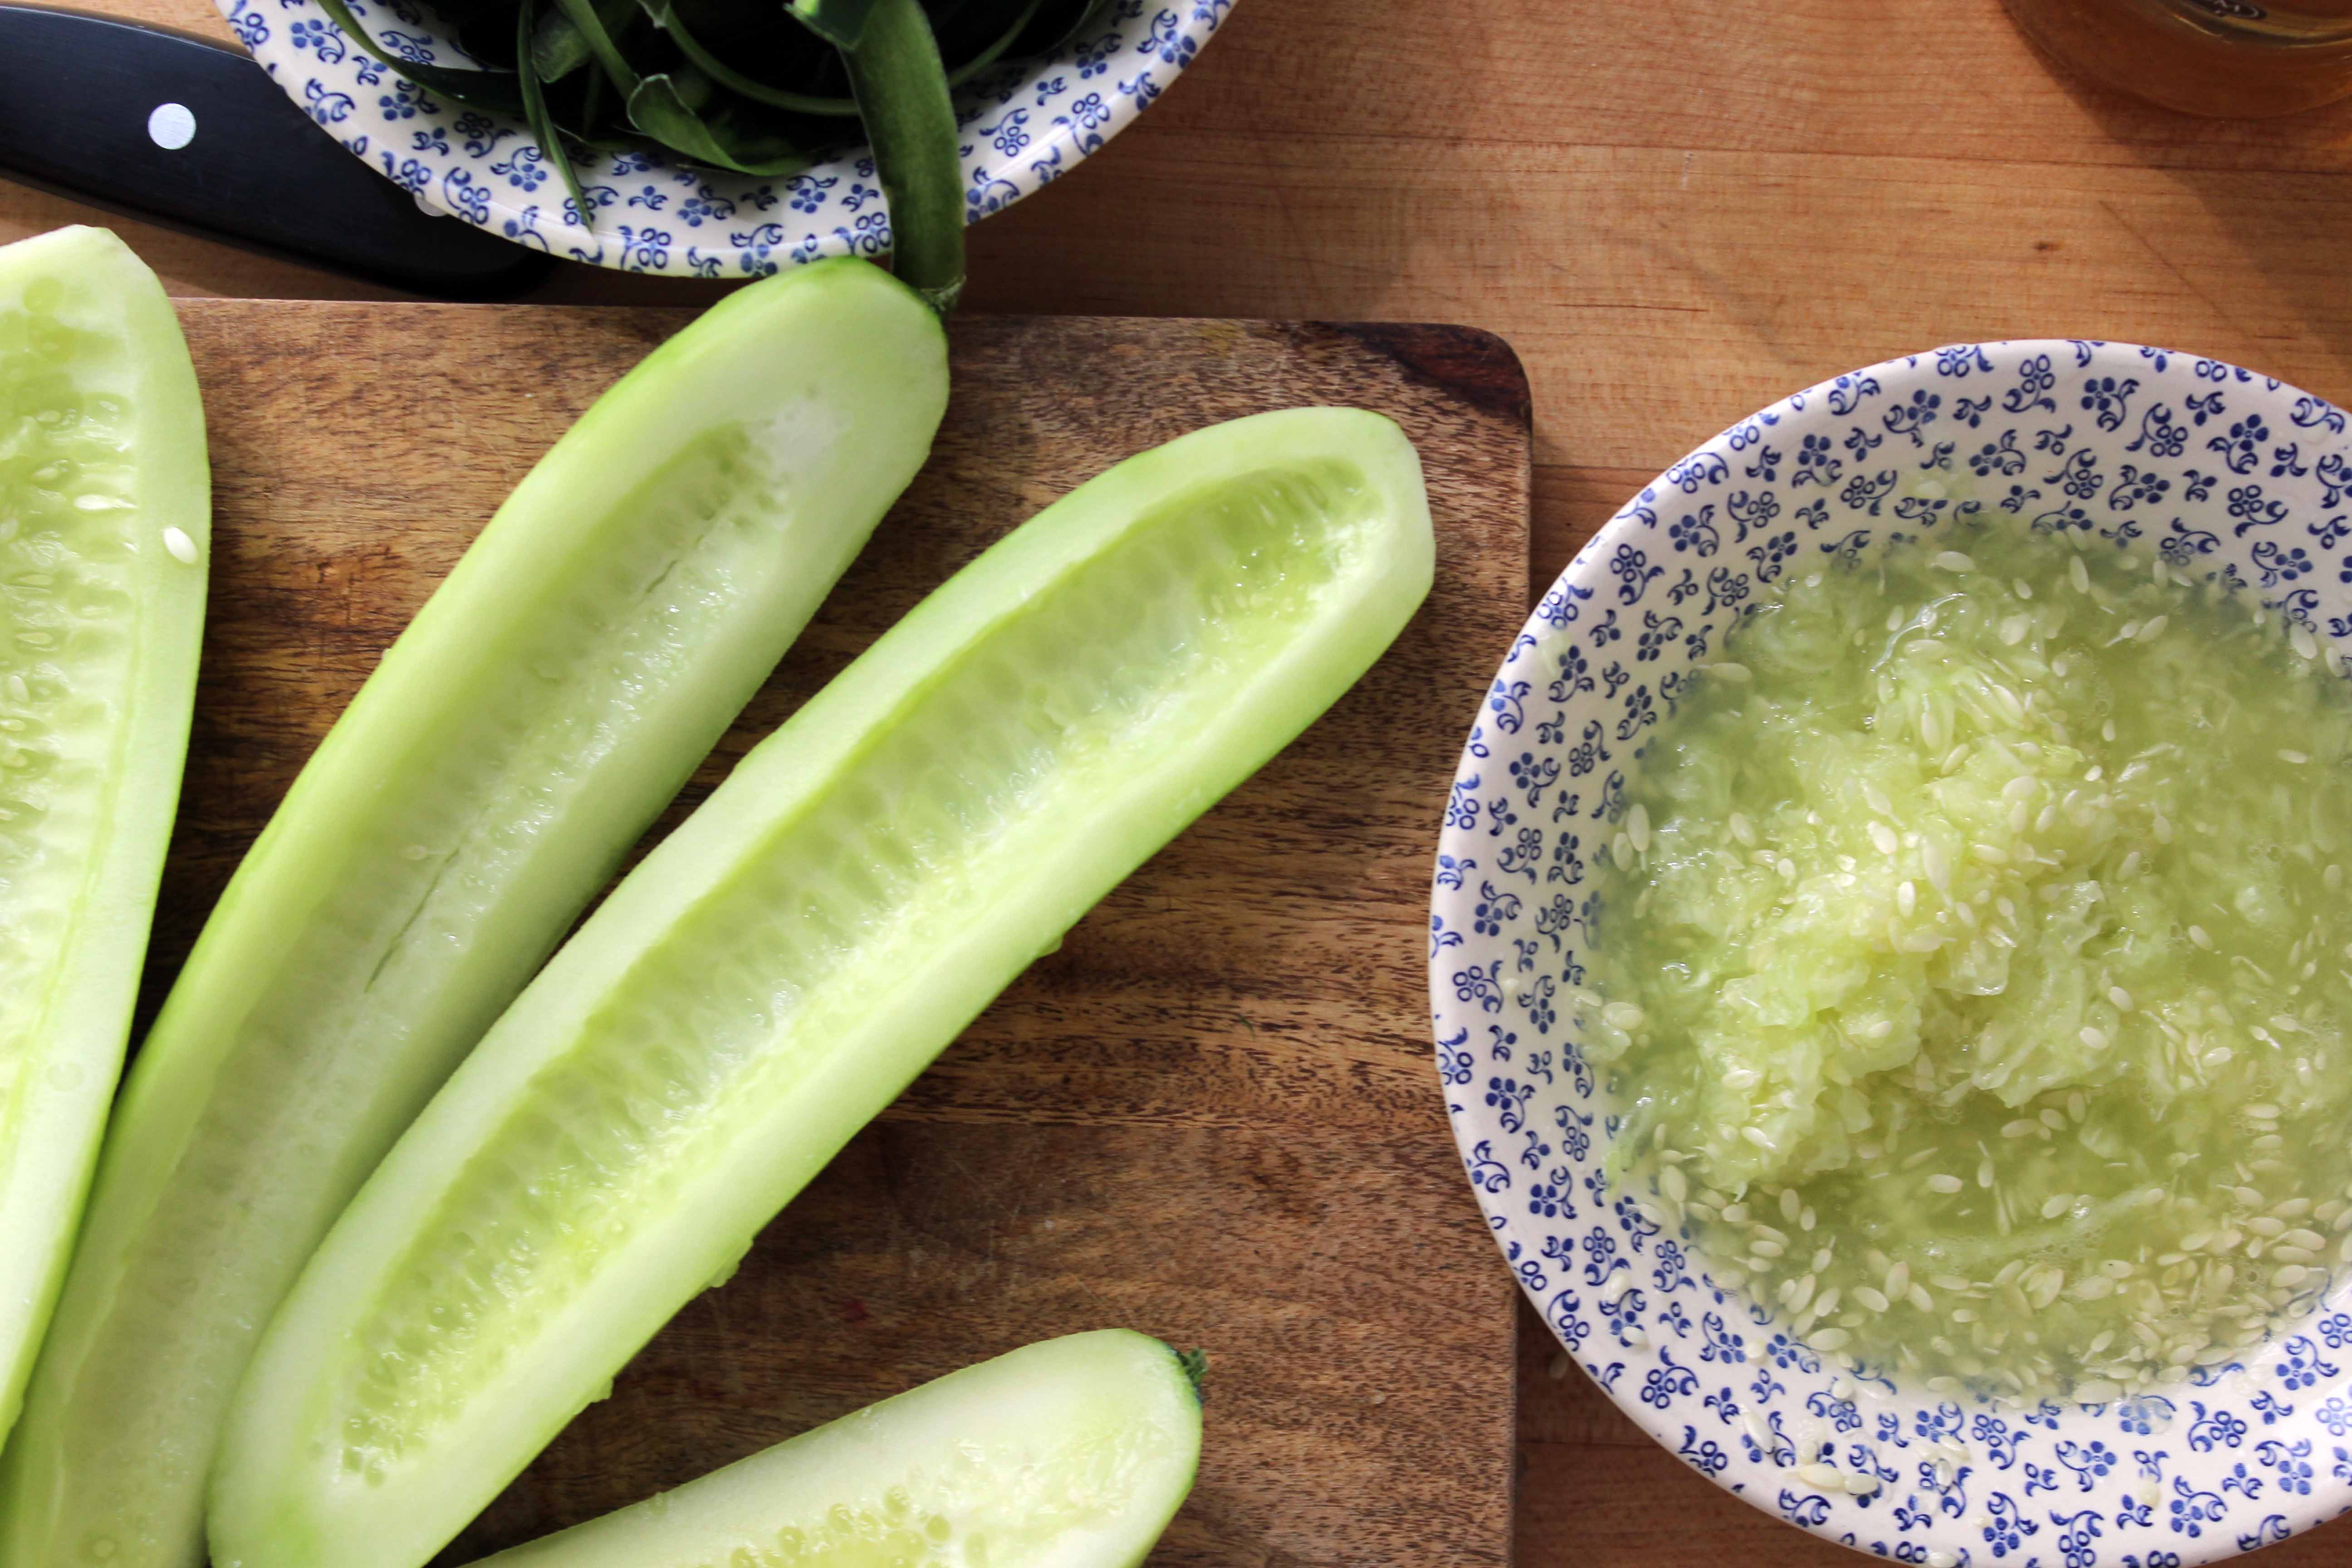 Removing Seeds from the Cucumbers | Foodal.com